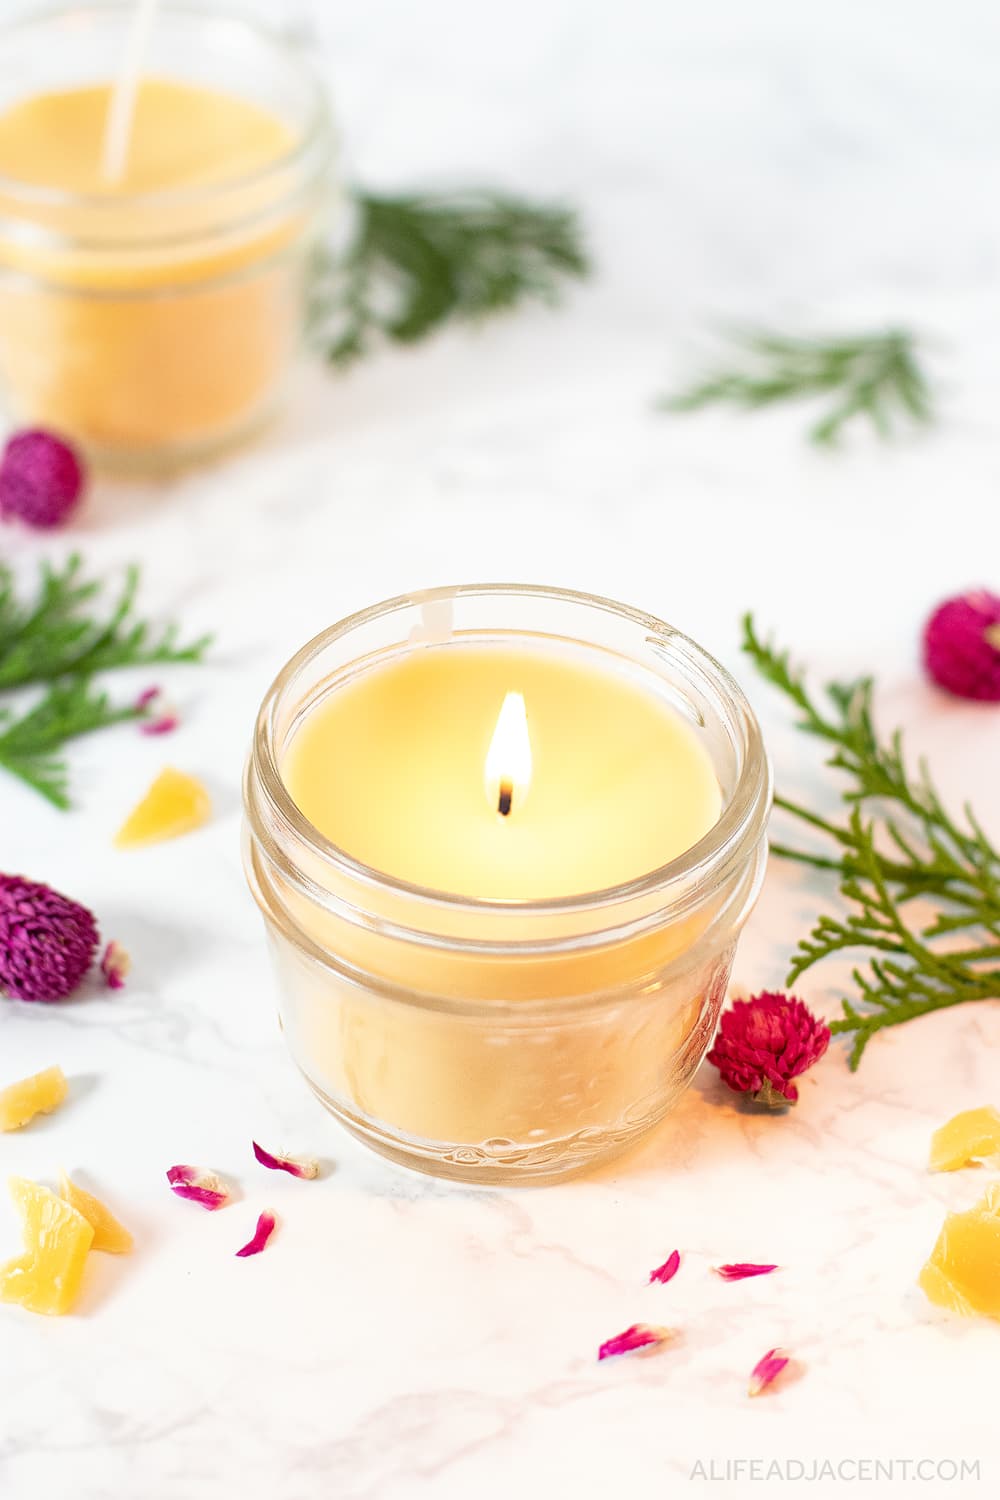 11 Incredible Candle Scents For Candle Making for 2023